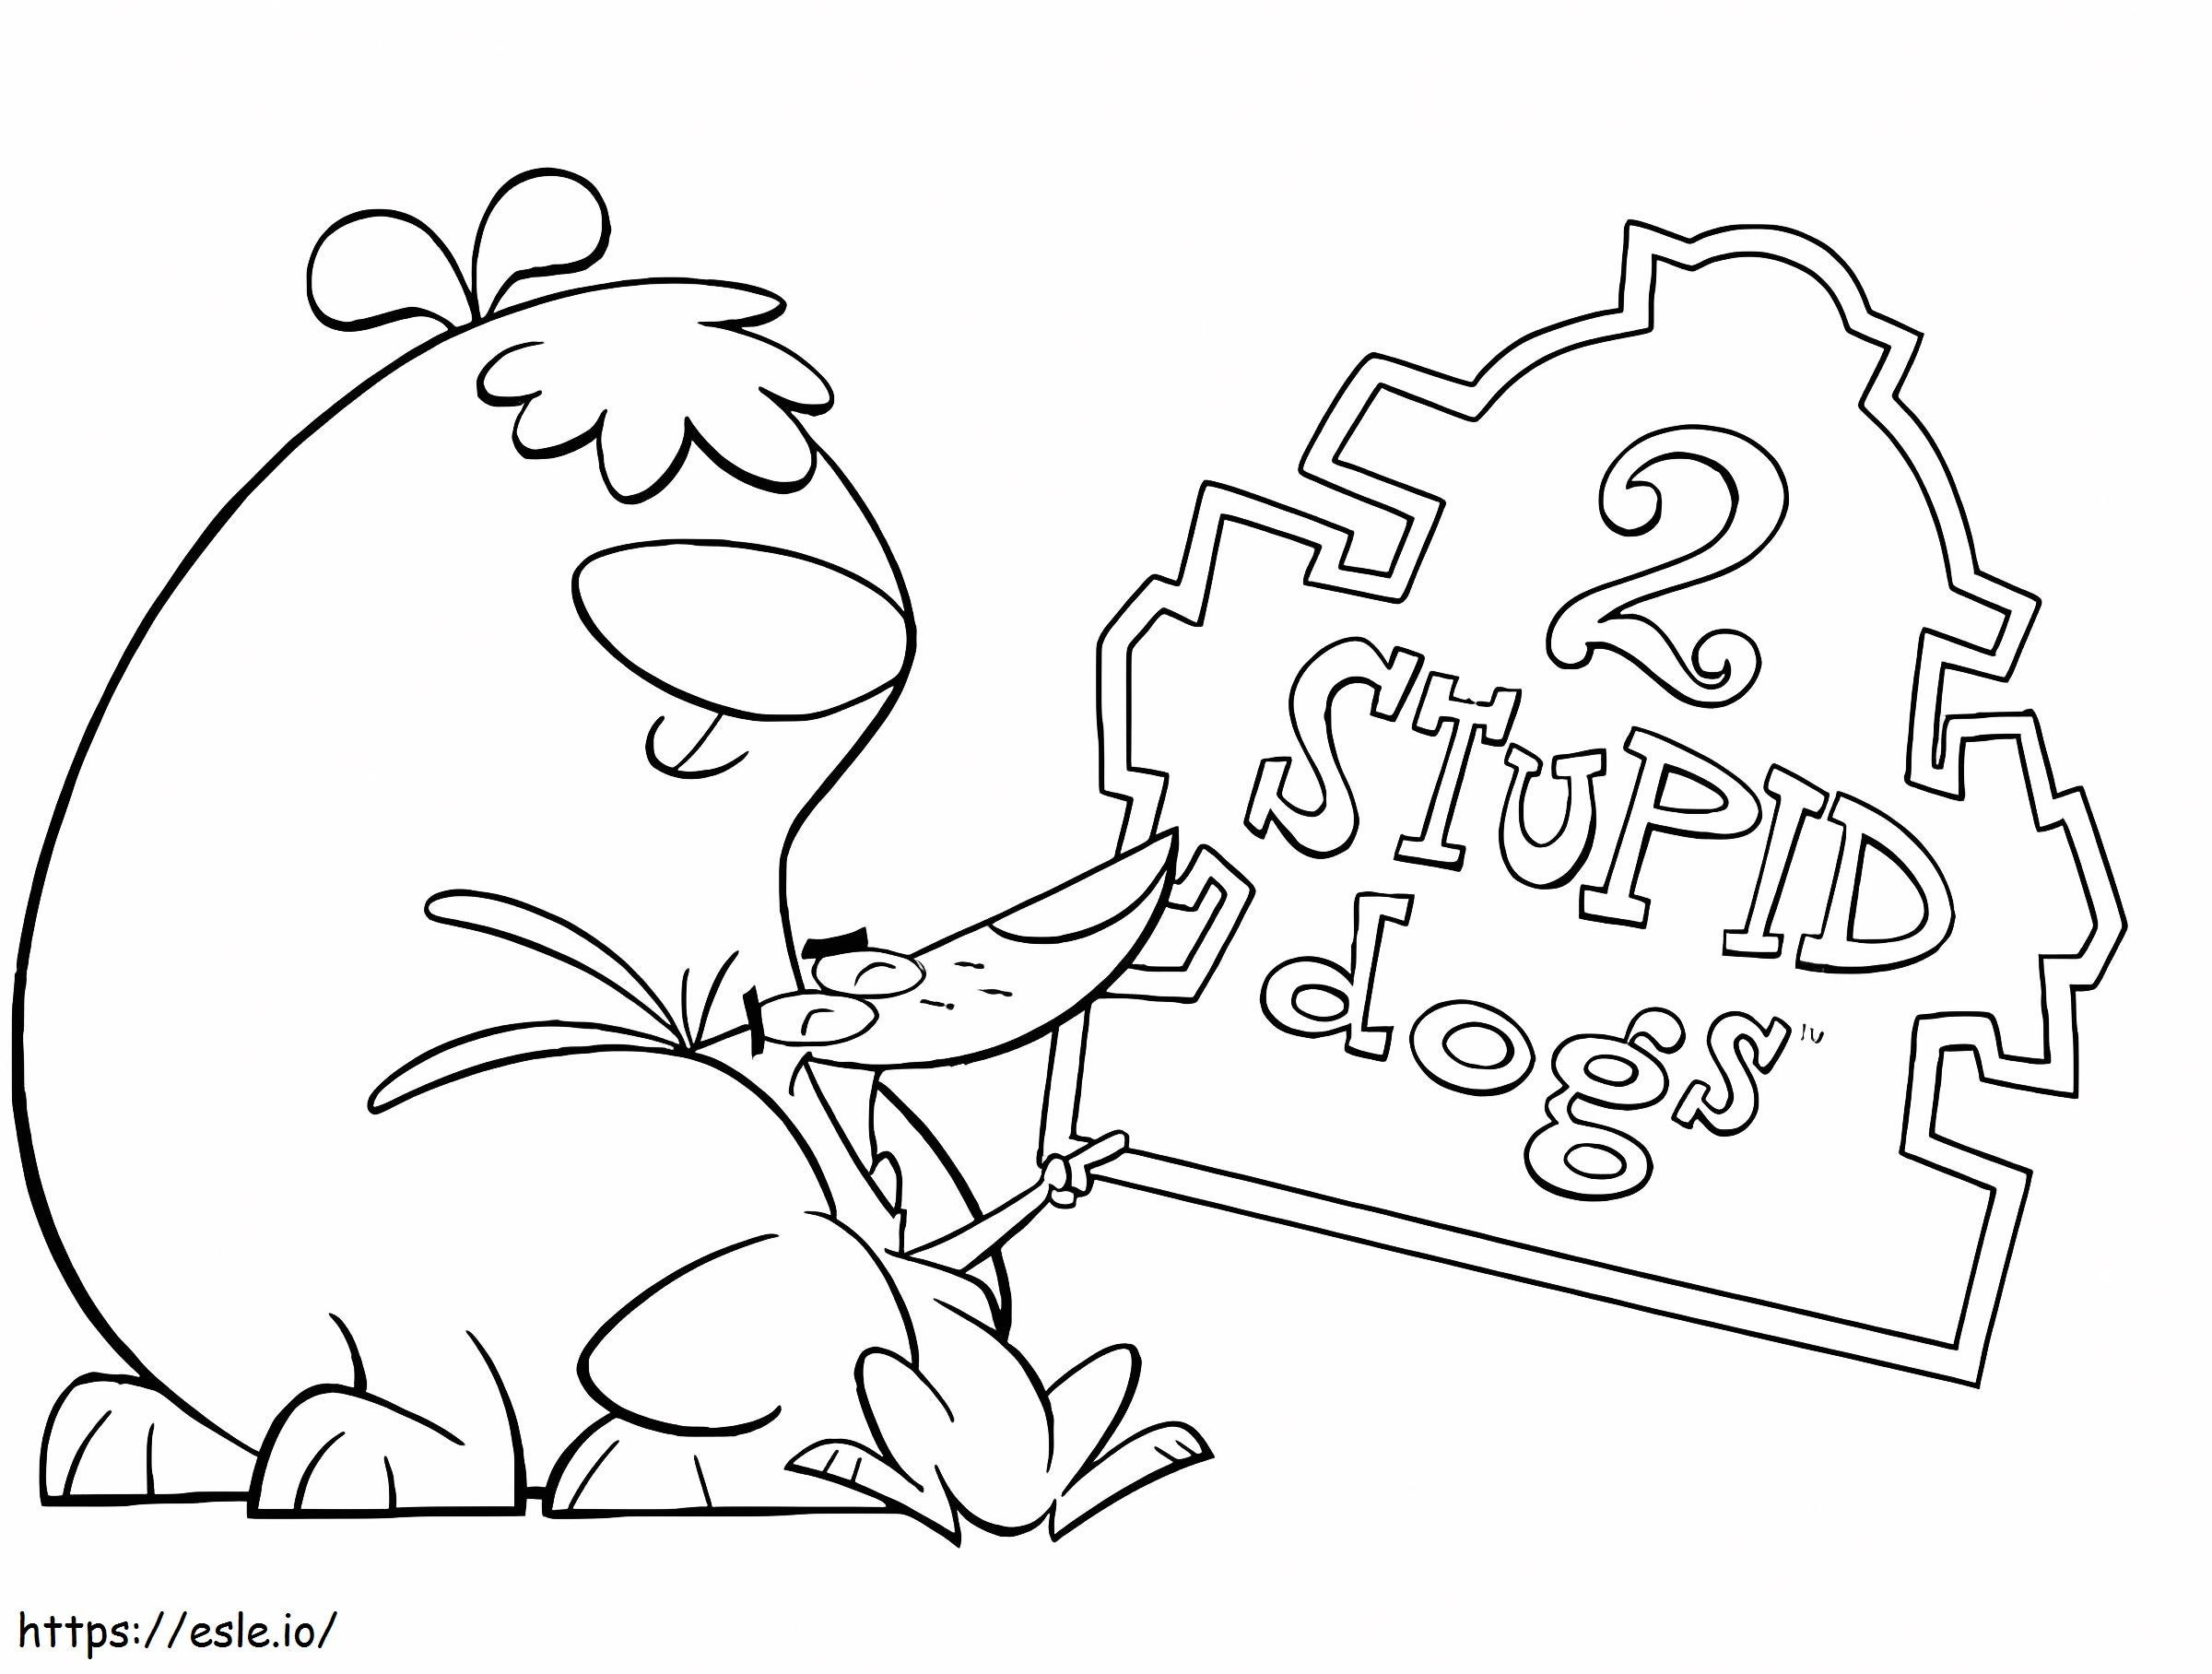 Stupid Dogs Cartoon coloring page